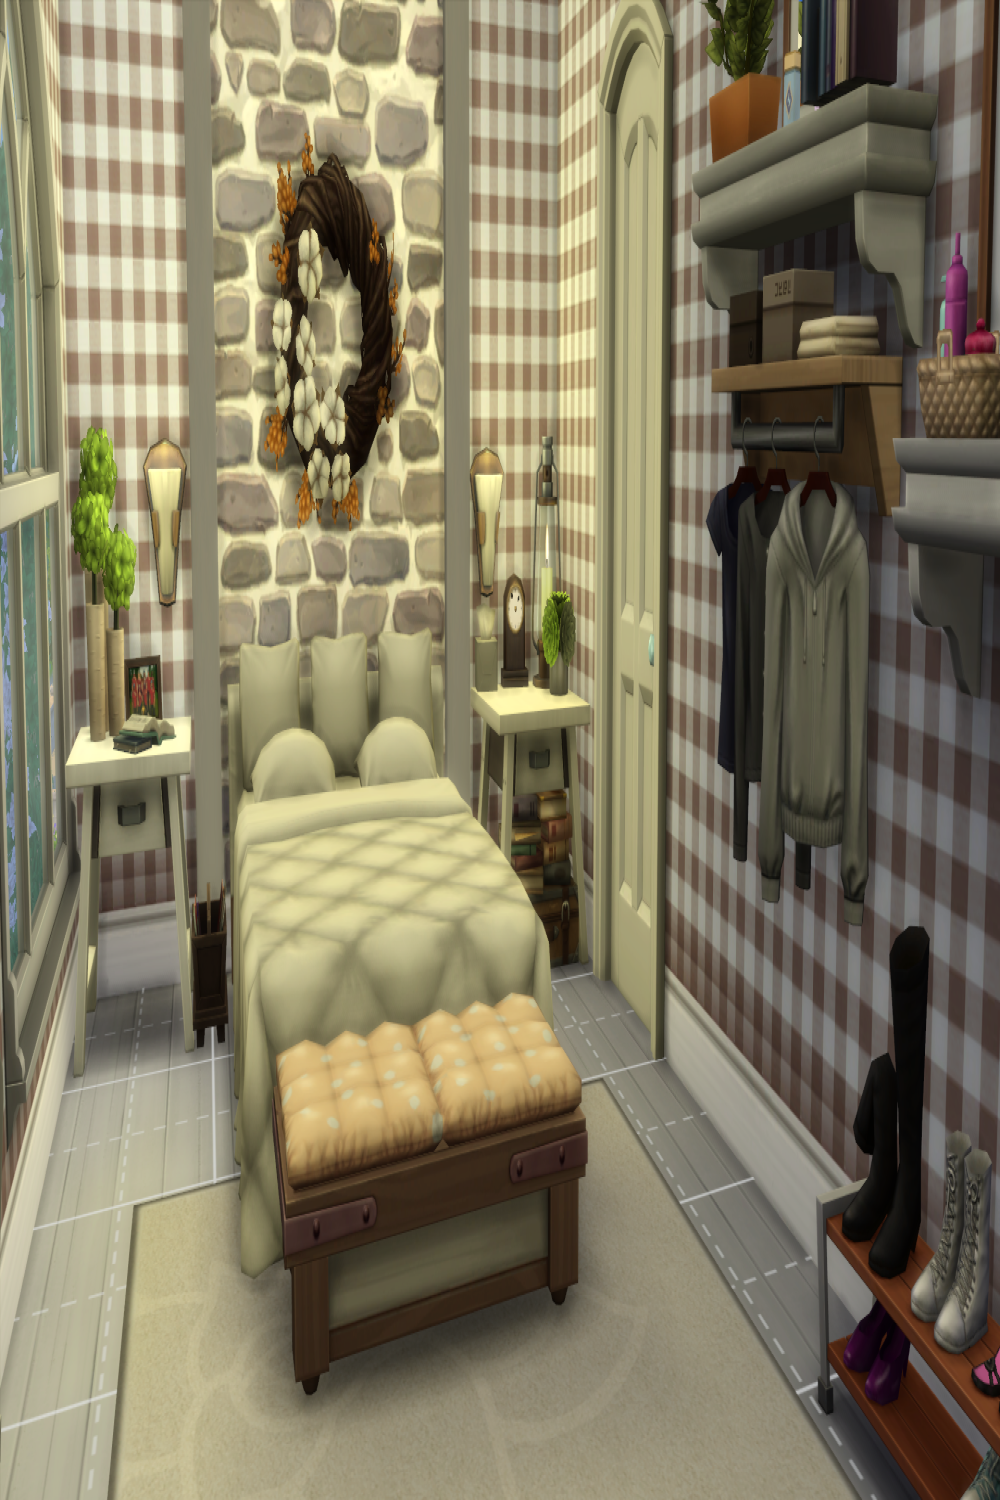 The Sims  No CC cottage cluttered bedroom  Sims  bedroom, Sims